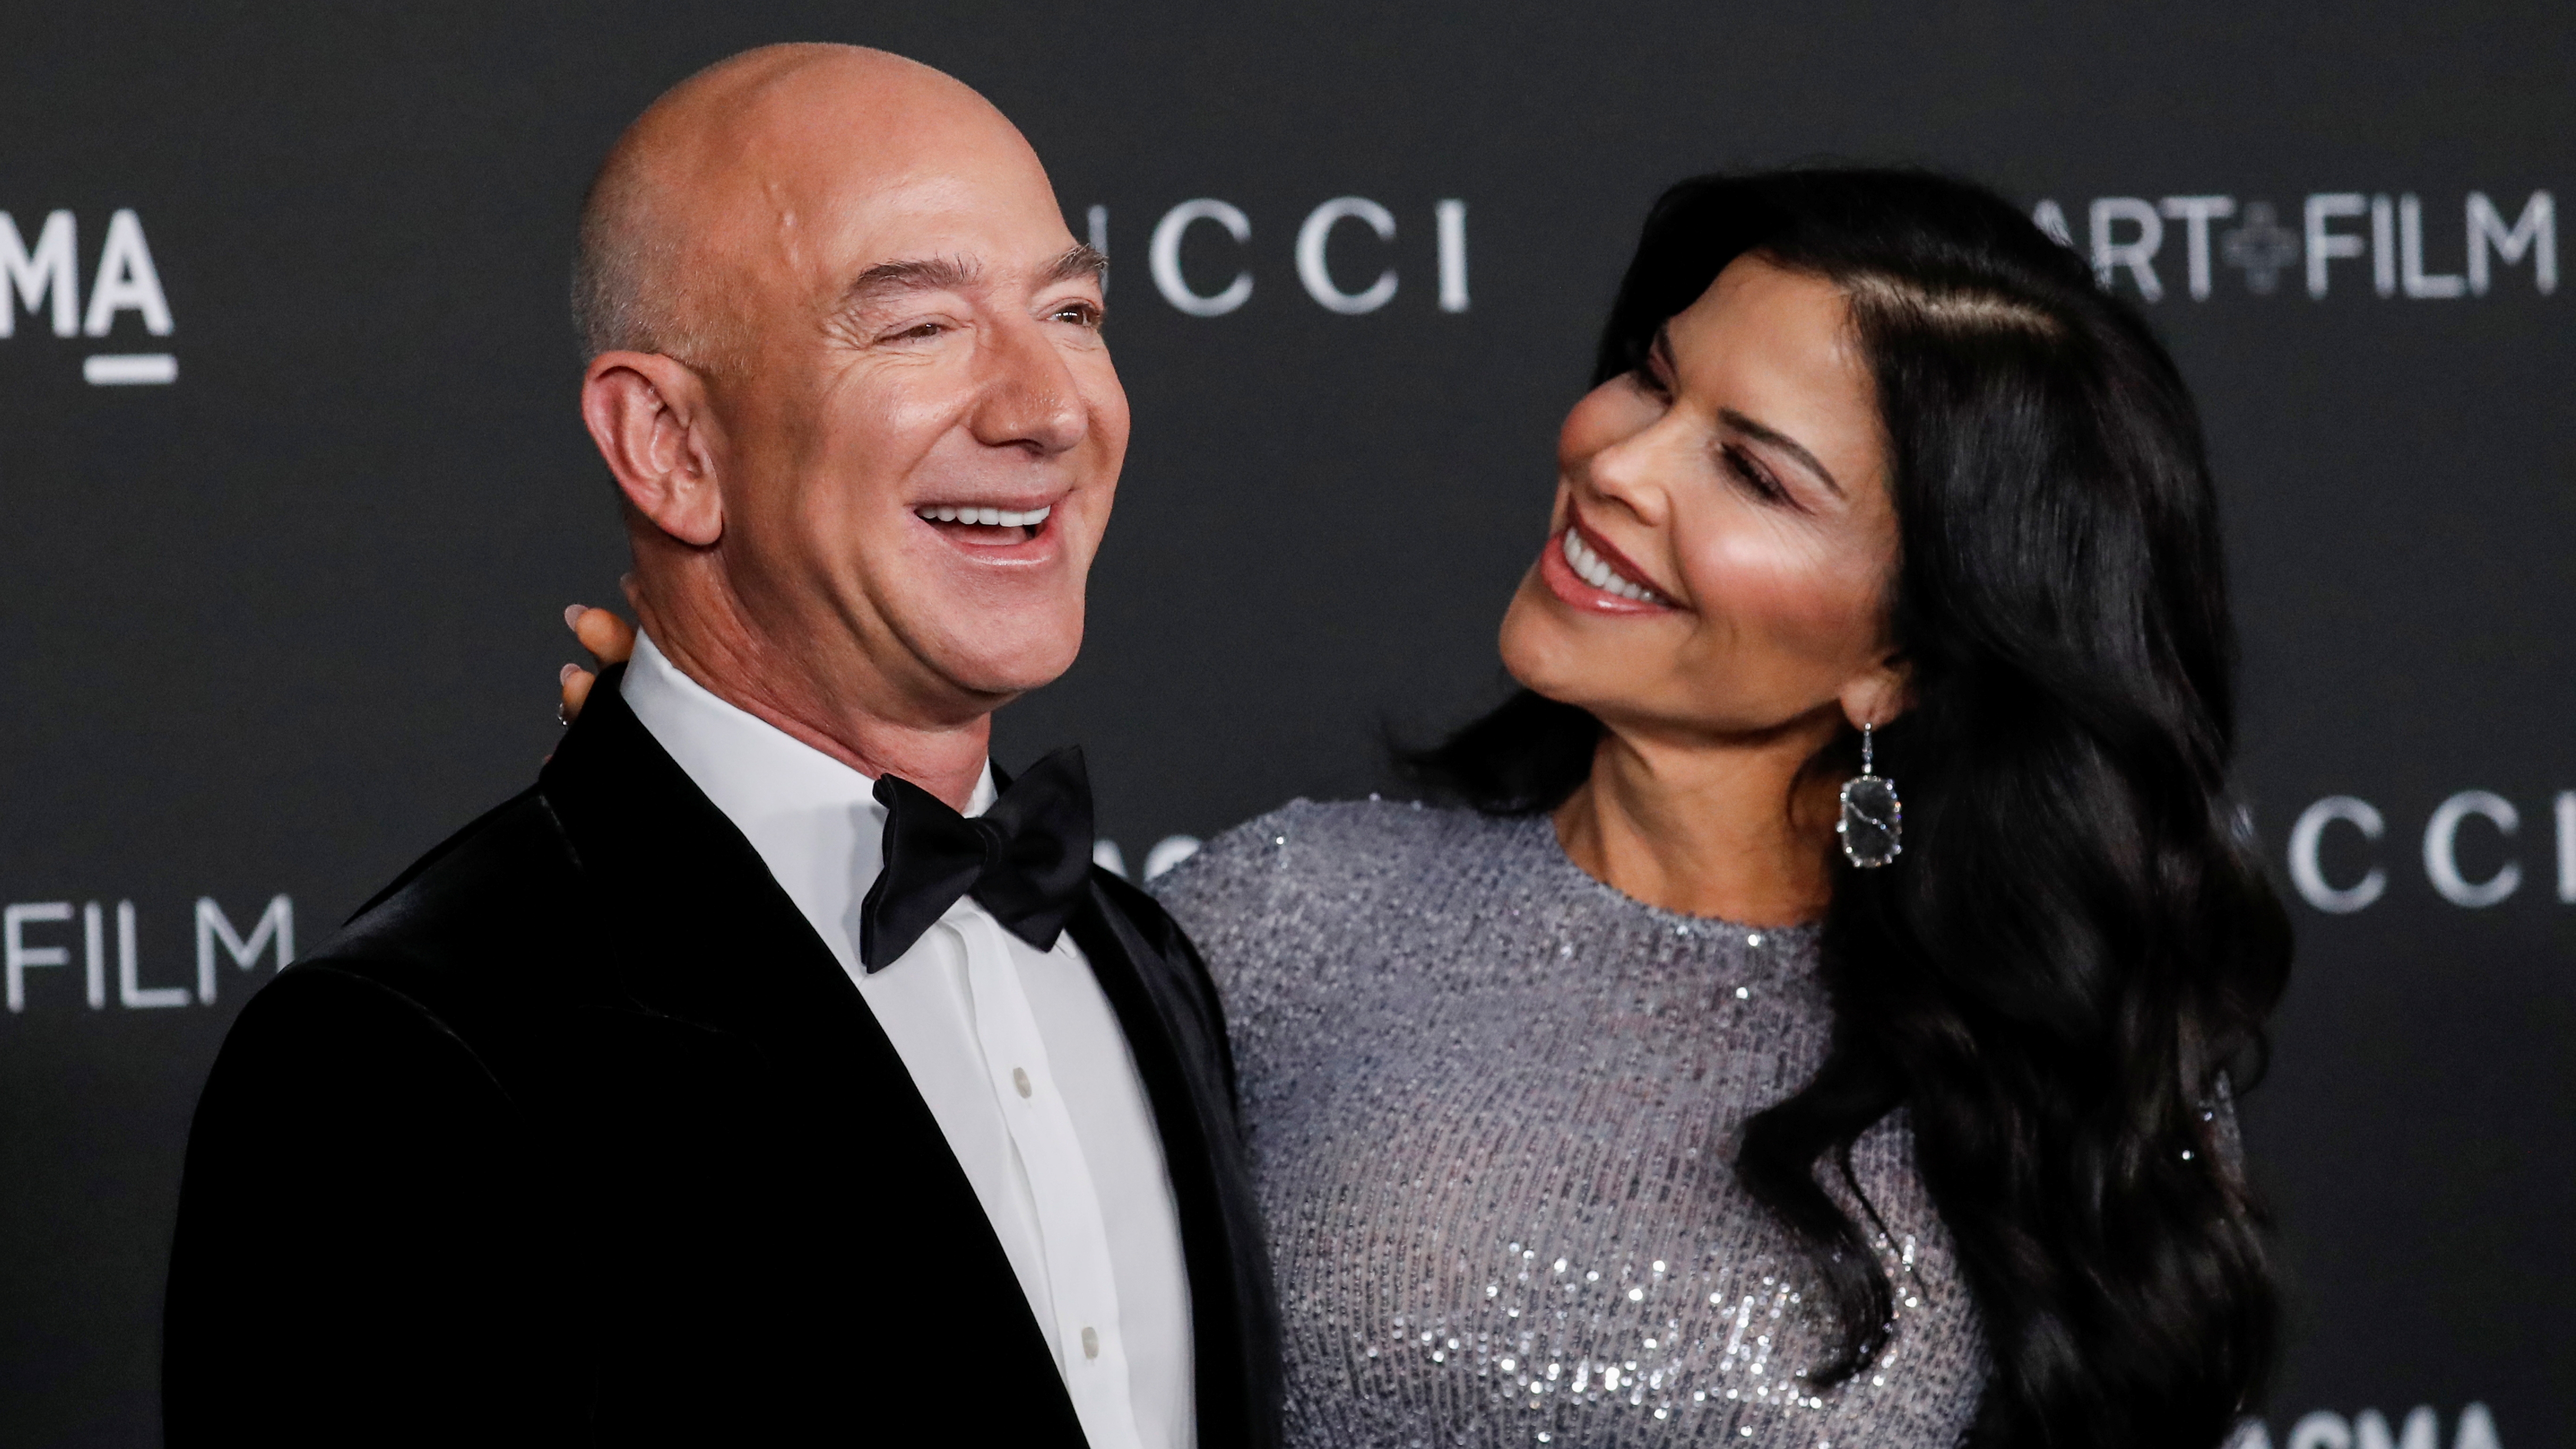 Jeff Bezos, the second richest man in the world according to Forbes, along with his partner Lauren Sánchez.  (REUTERS/Mario Anzuoni)